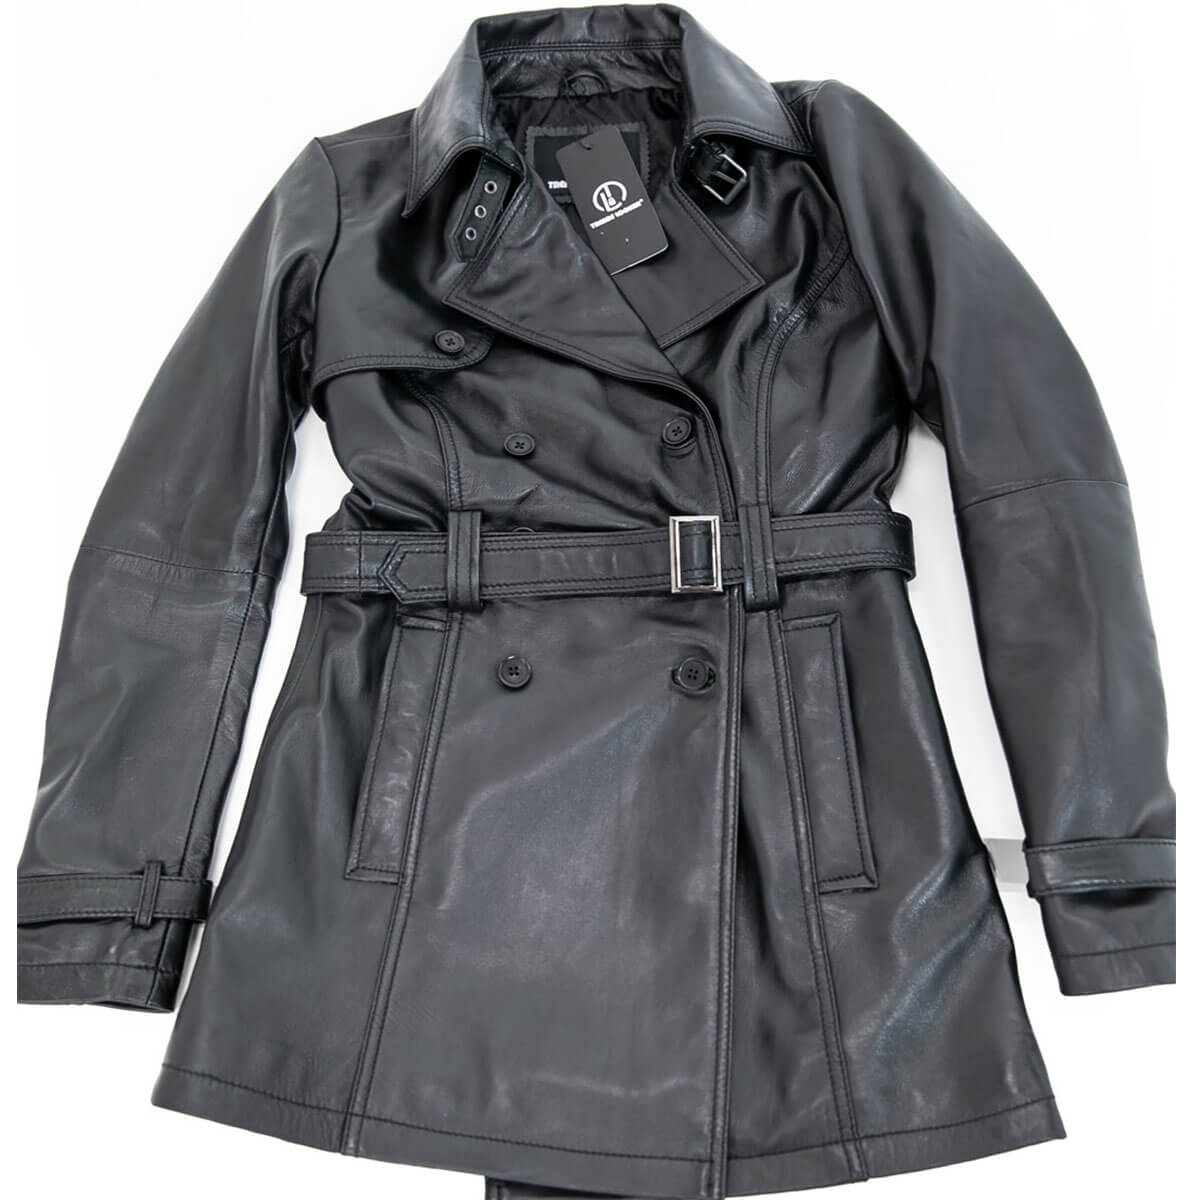 Mid-Length Belted Black Leather Trench Coat Womens